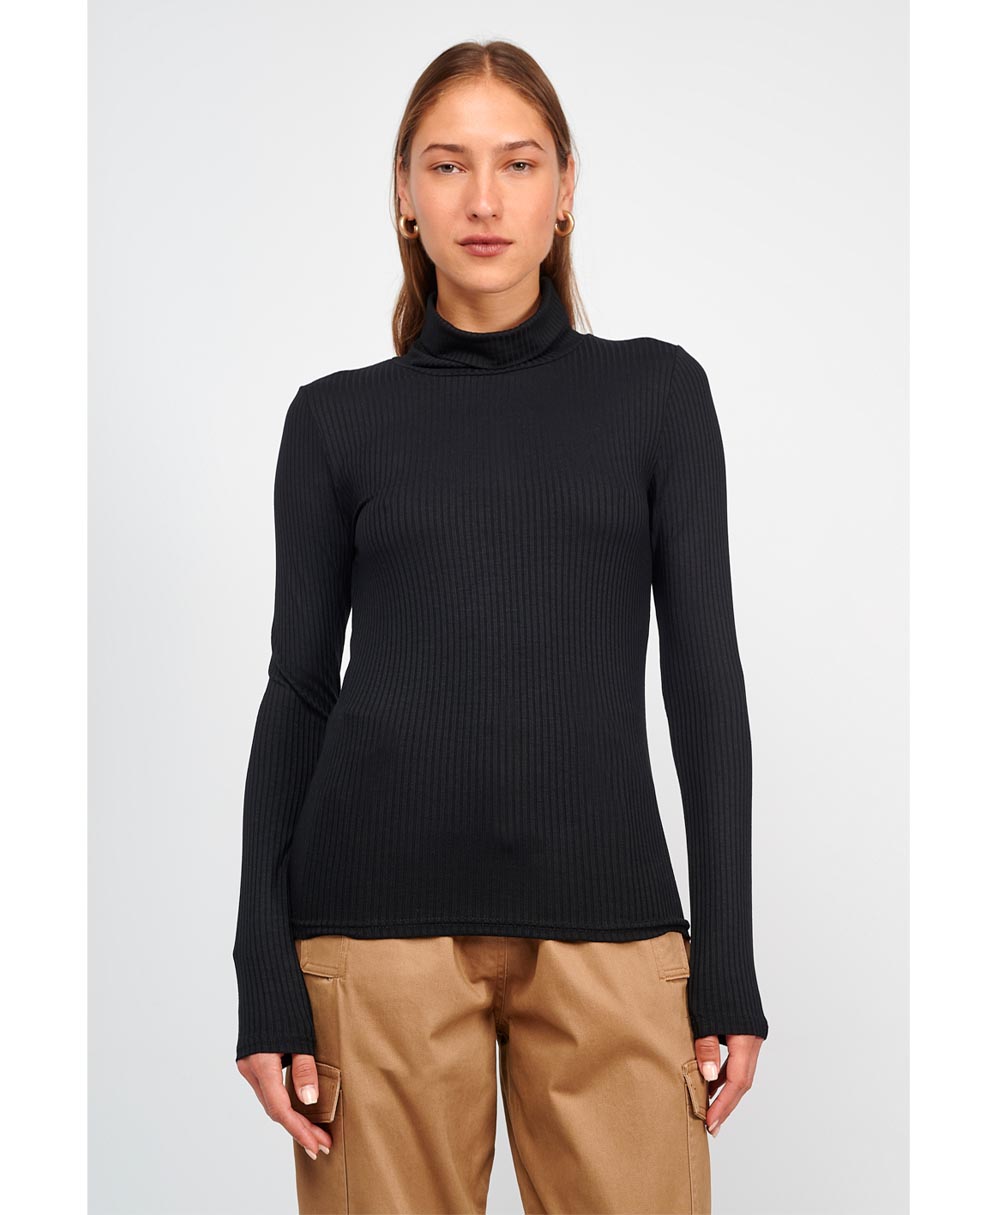 mauro black zibagko turtle neck fall winter 2021 my t wearables